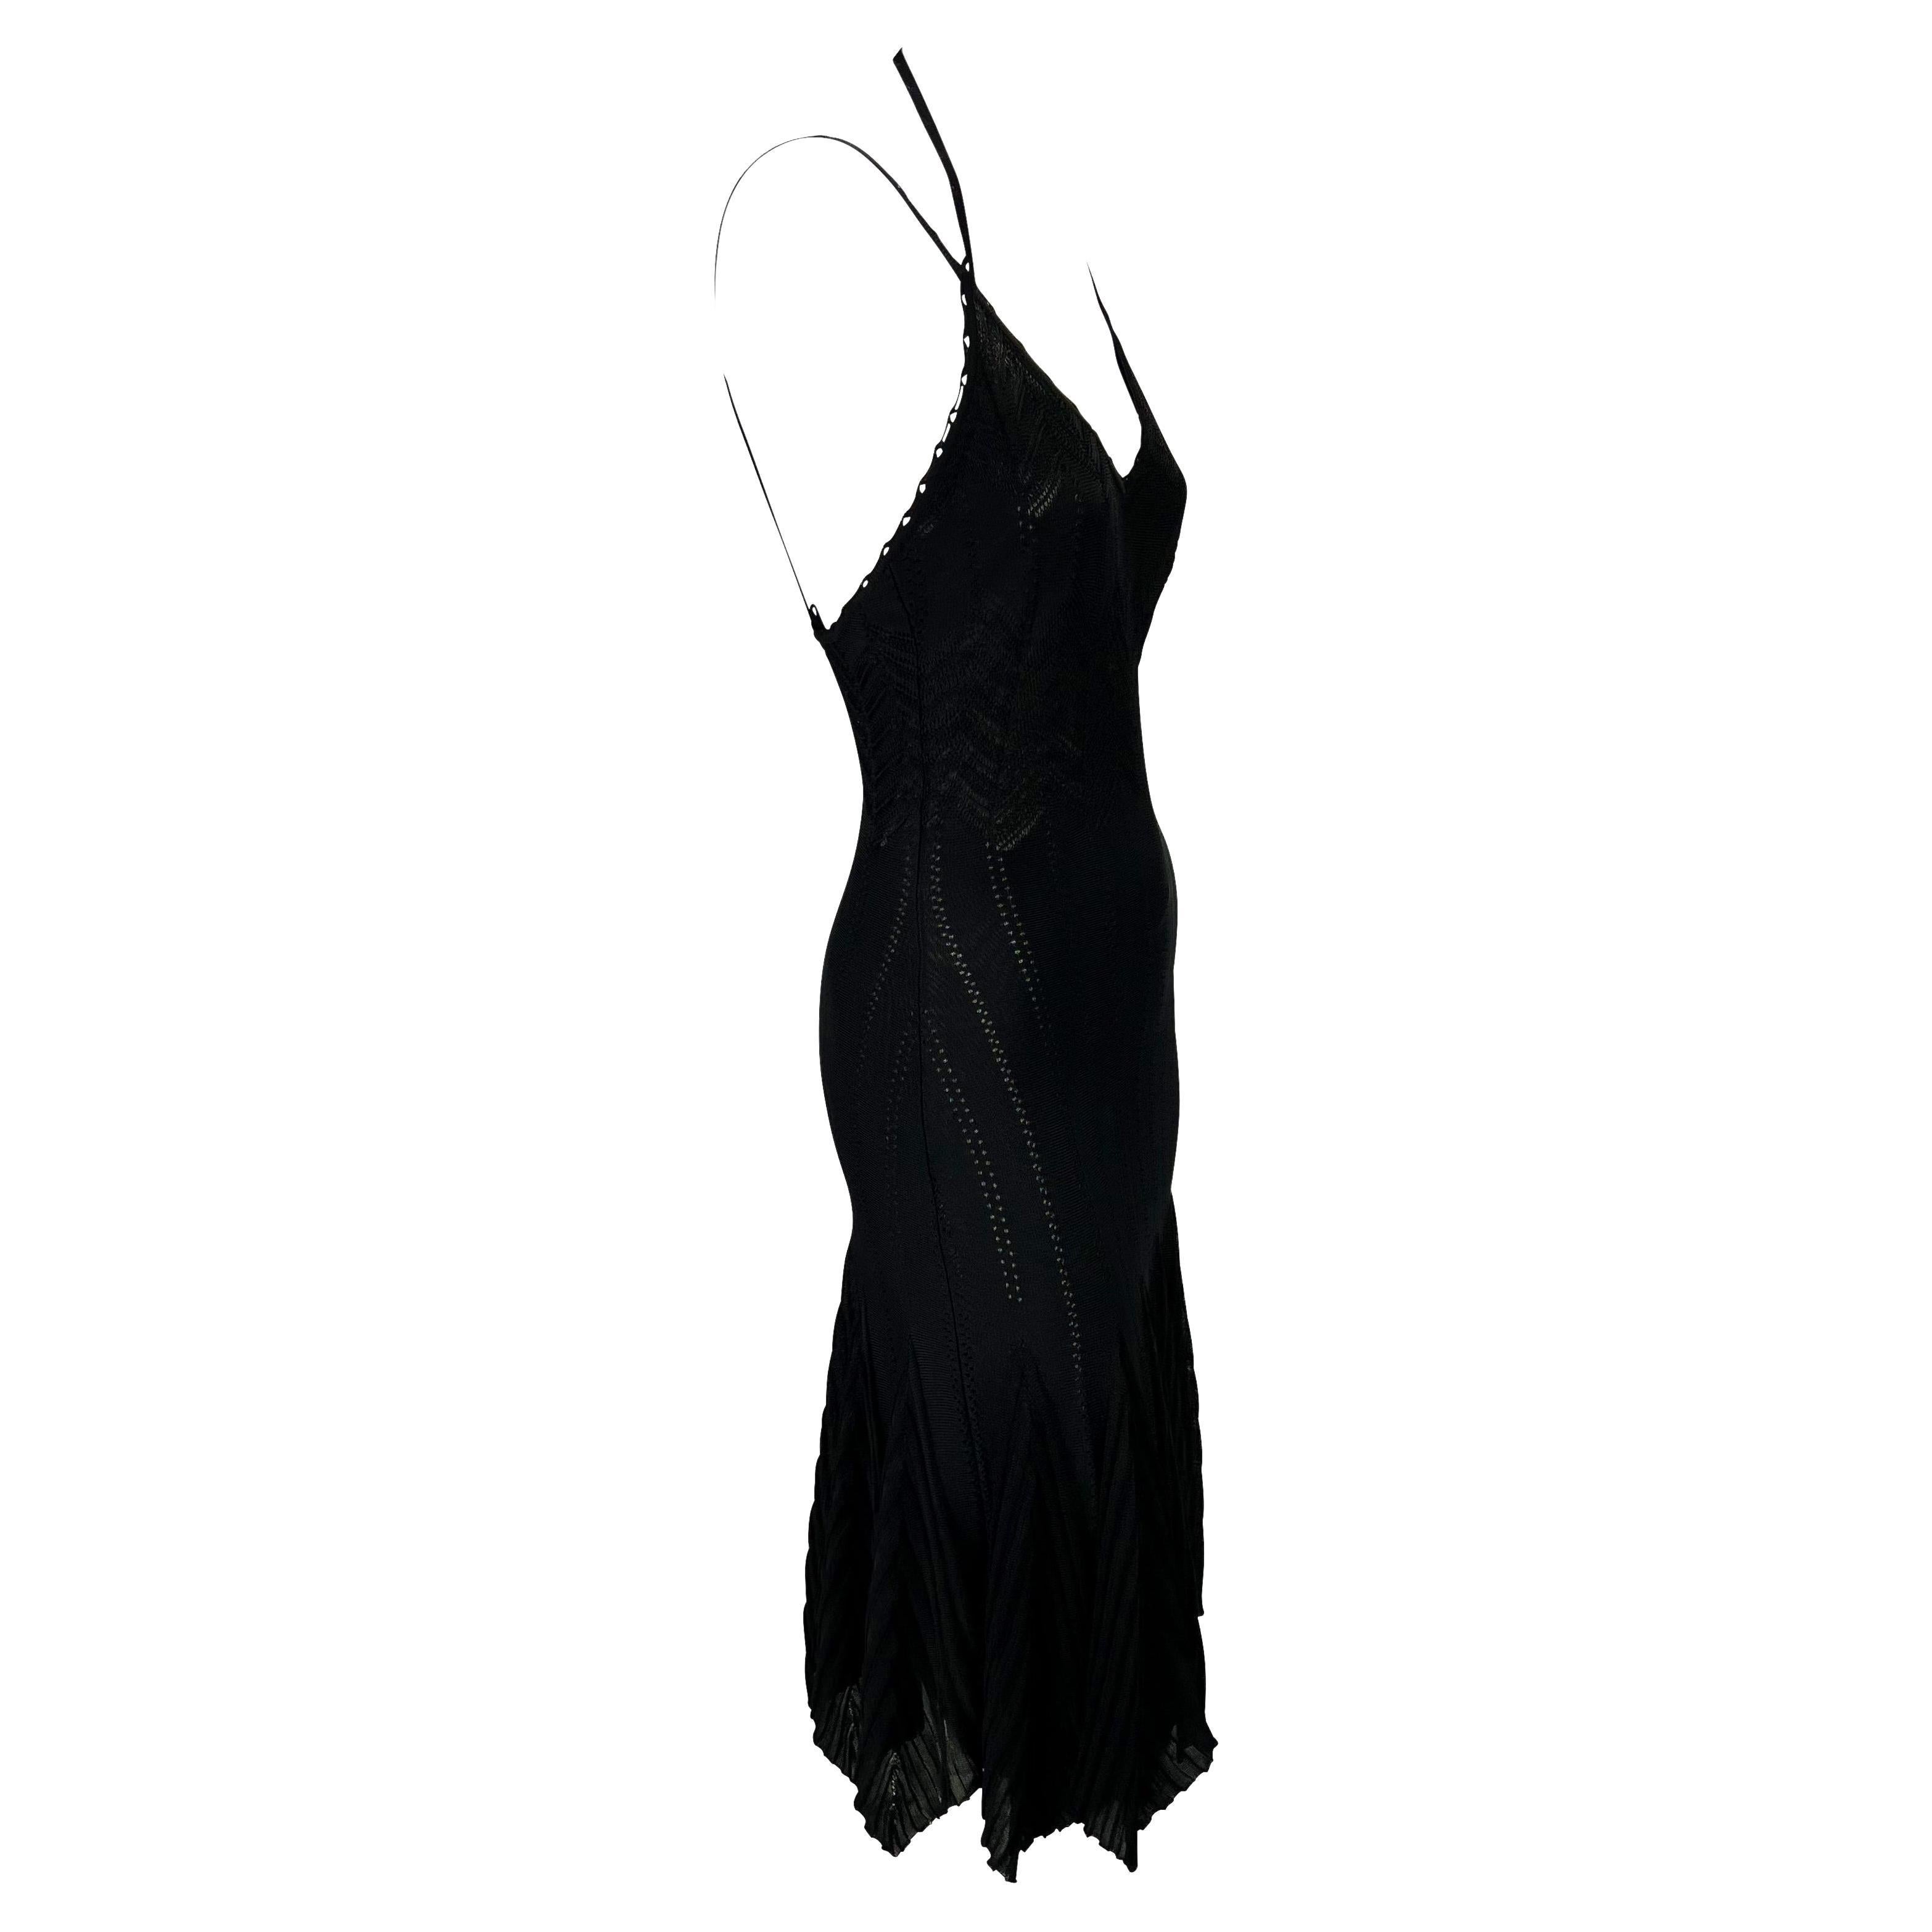 S/S 2006 Christian Dior by John Galliano Sheer Stretch Knit Black Flare Dress For Sale 2